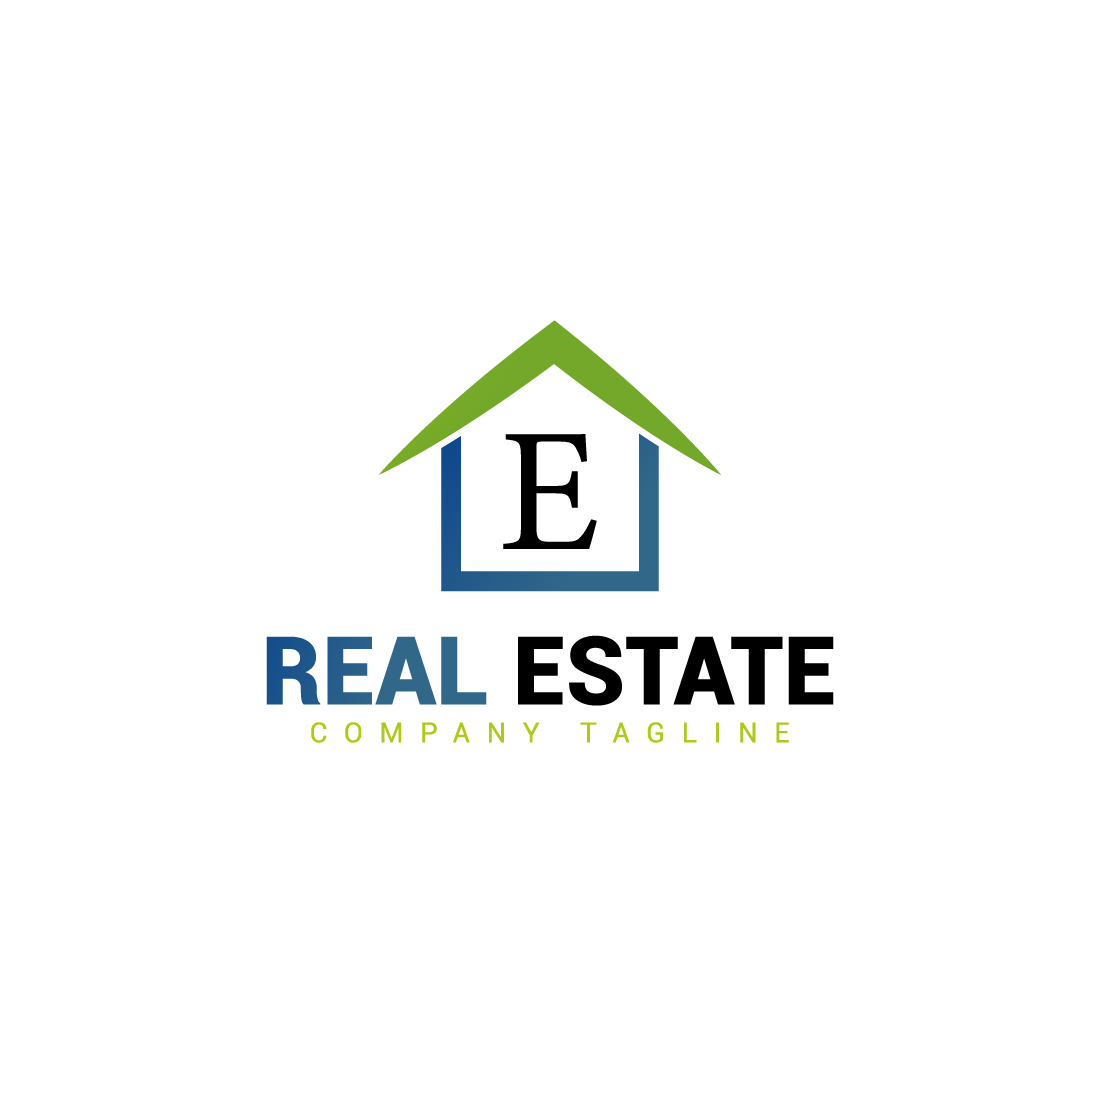 Real estate logo with green, dark blue color and E letter cover image.